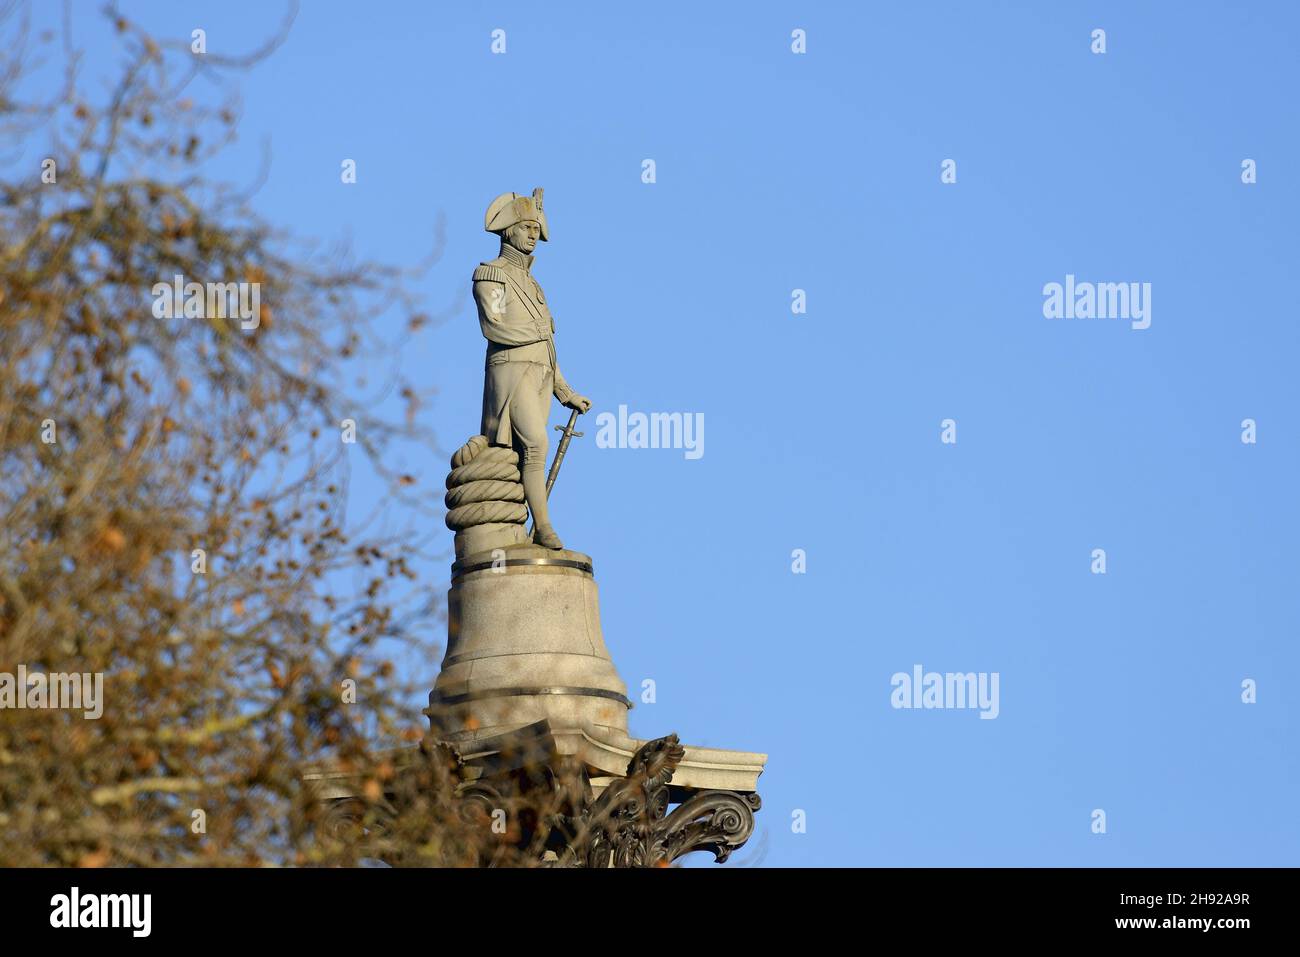 London, England, UK. Nelson's Column in Trafalgar Square seen from the Mall, through autumn leaves, December. Stock Photo